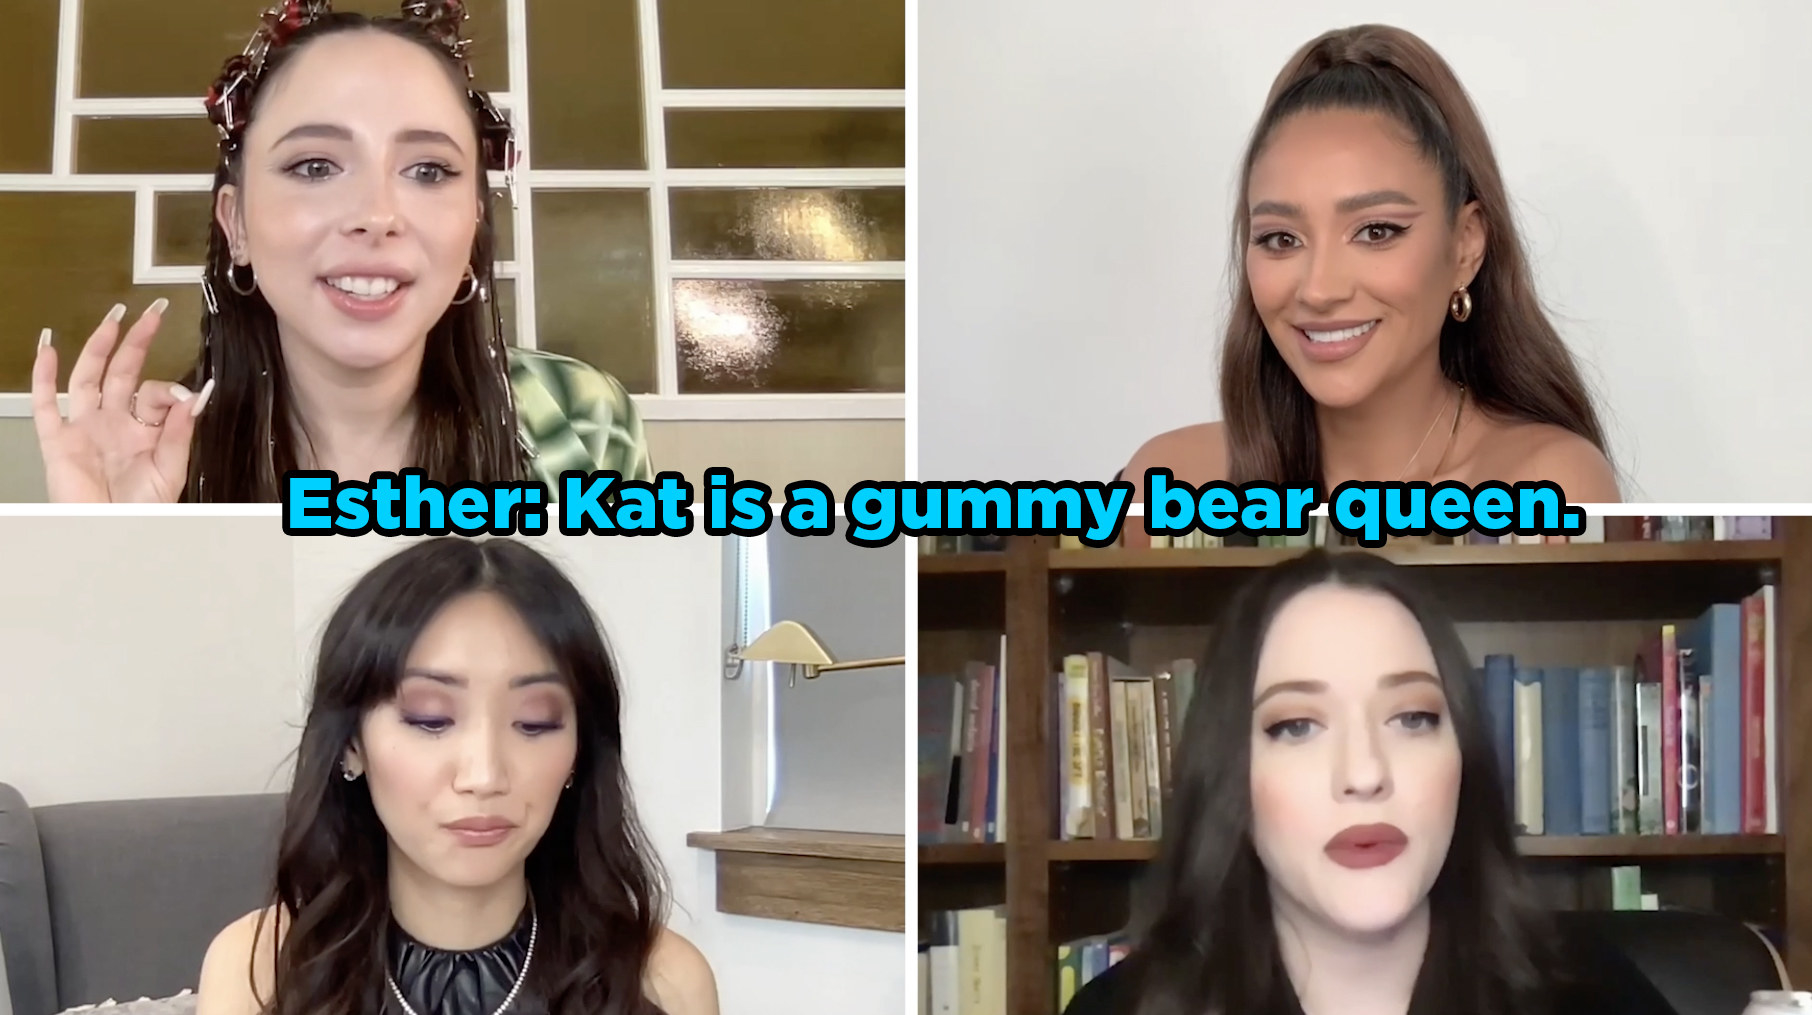 Esther said that Kat is a gummy bear queen